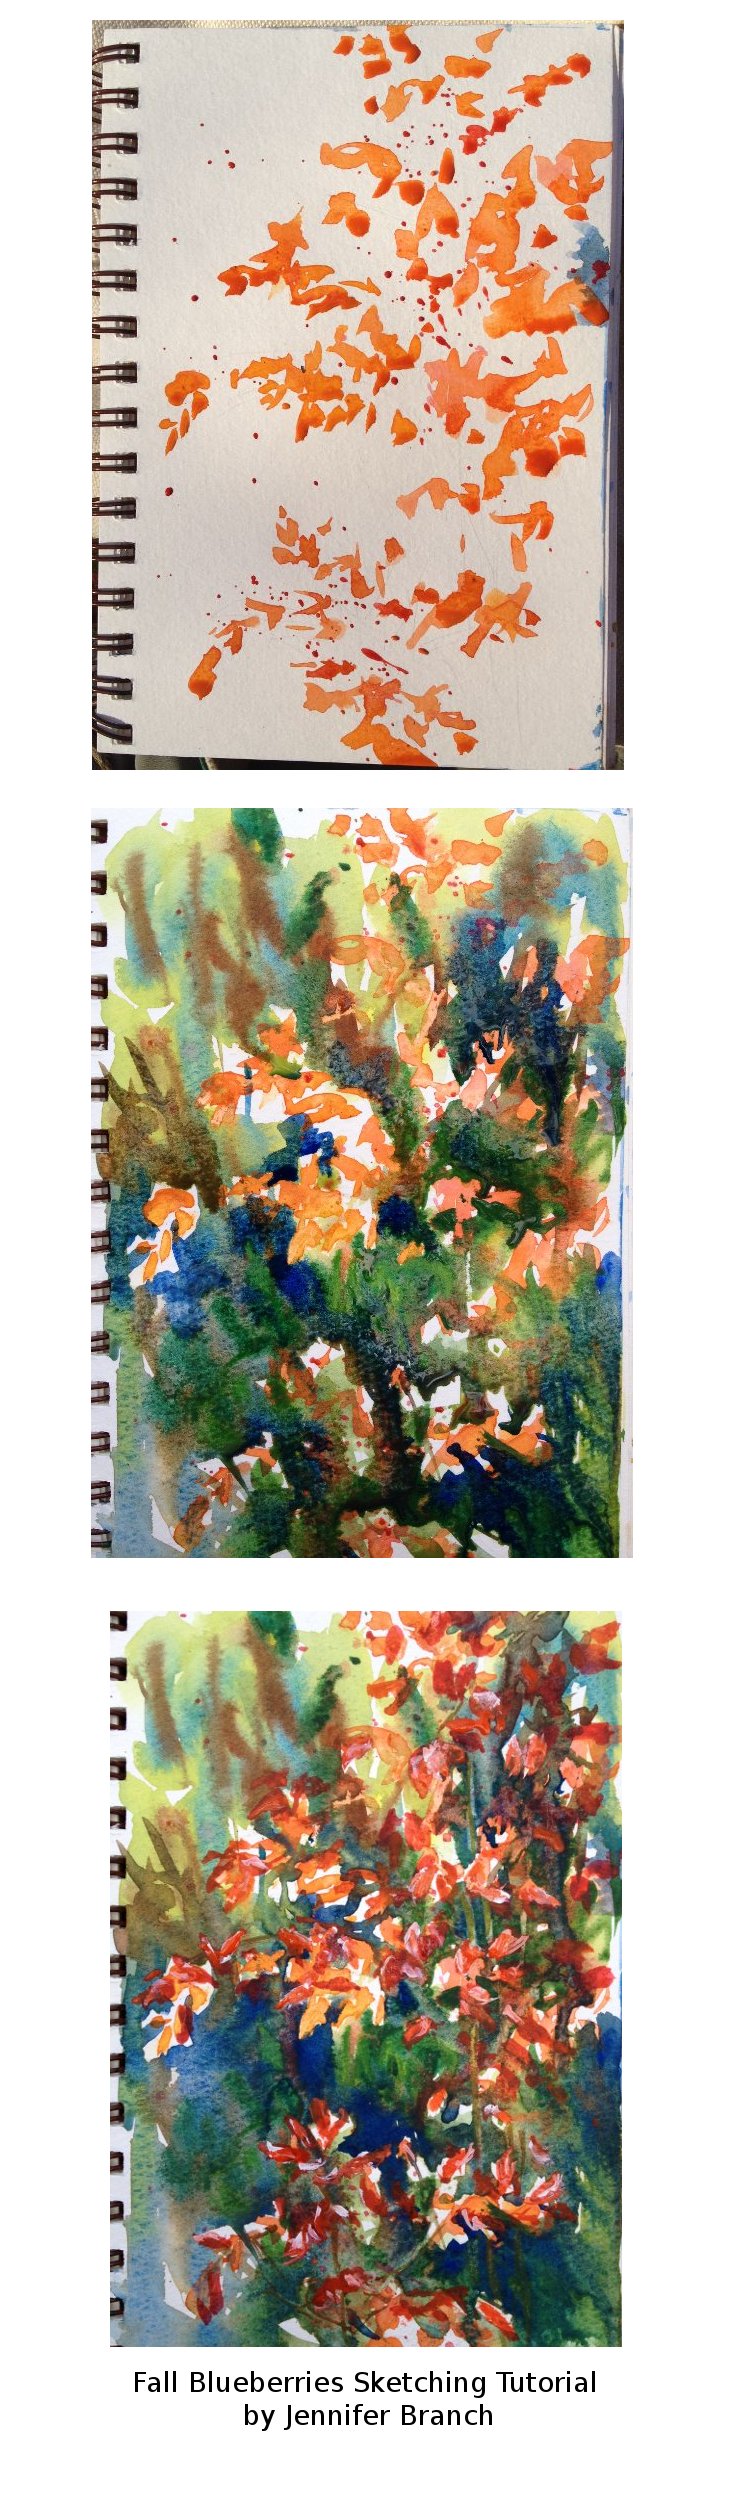 Sketching Fall Blueberries watercolor painting tutorial by Jennifer Branch